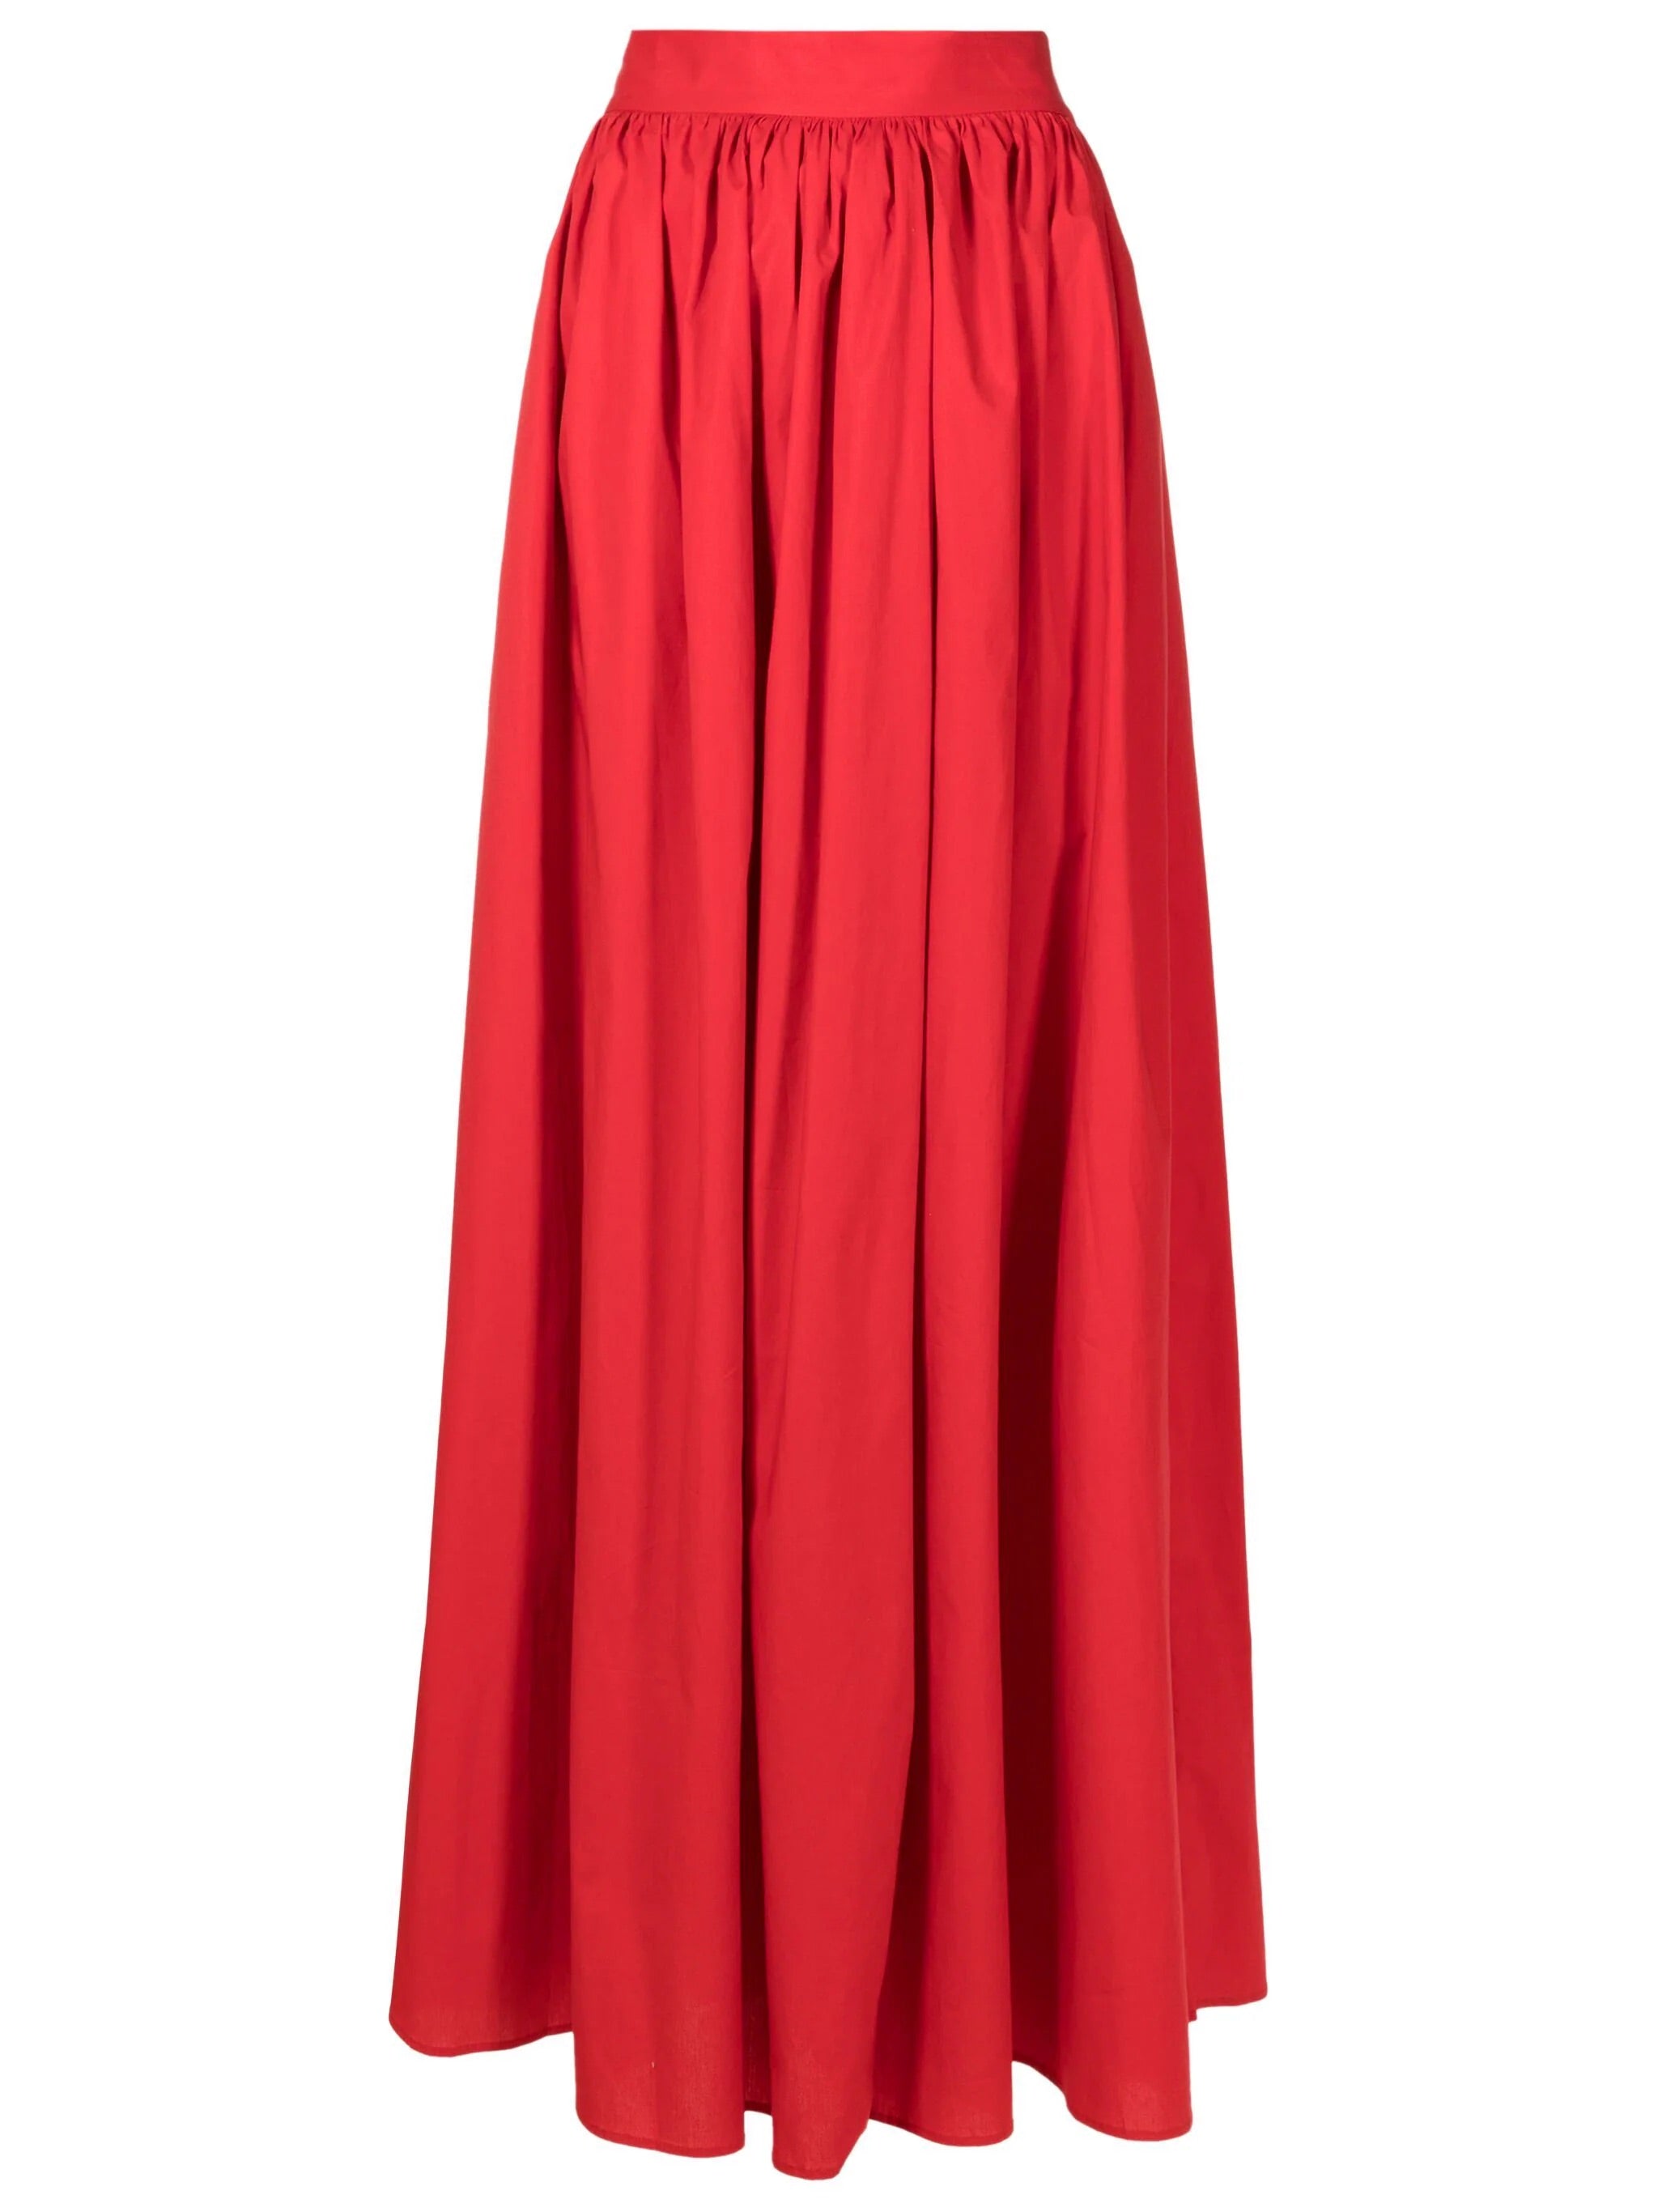 Solid Hearts Red Long Skirt Product